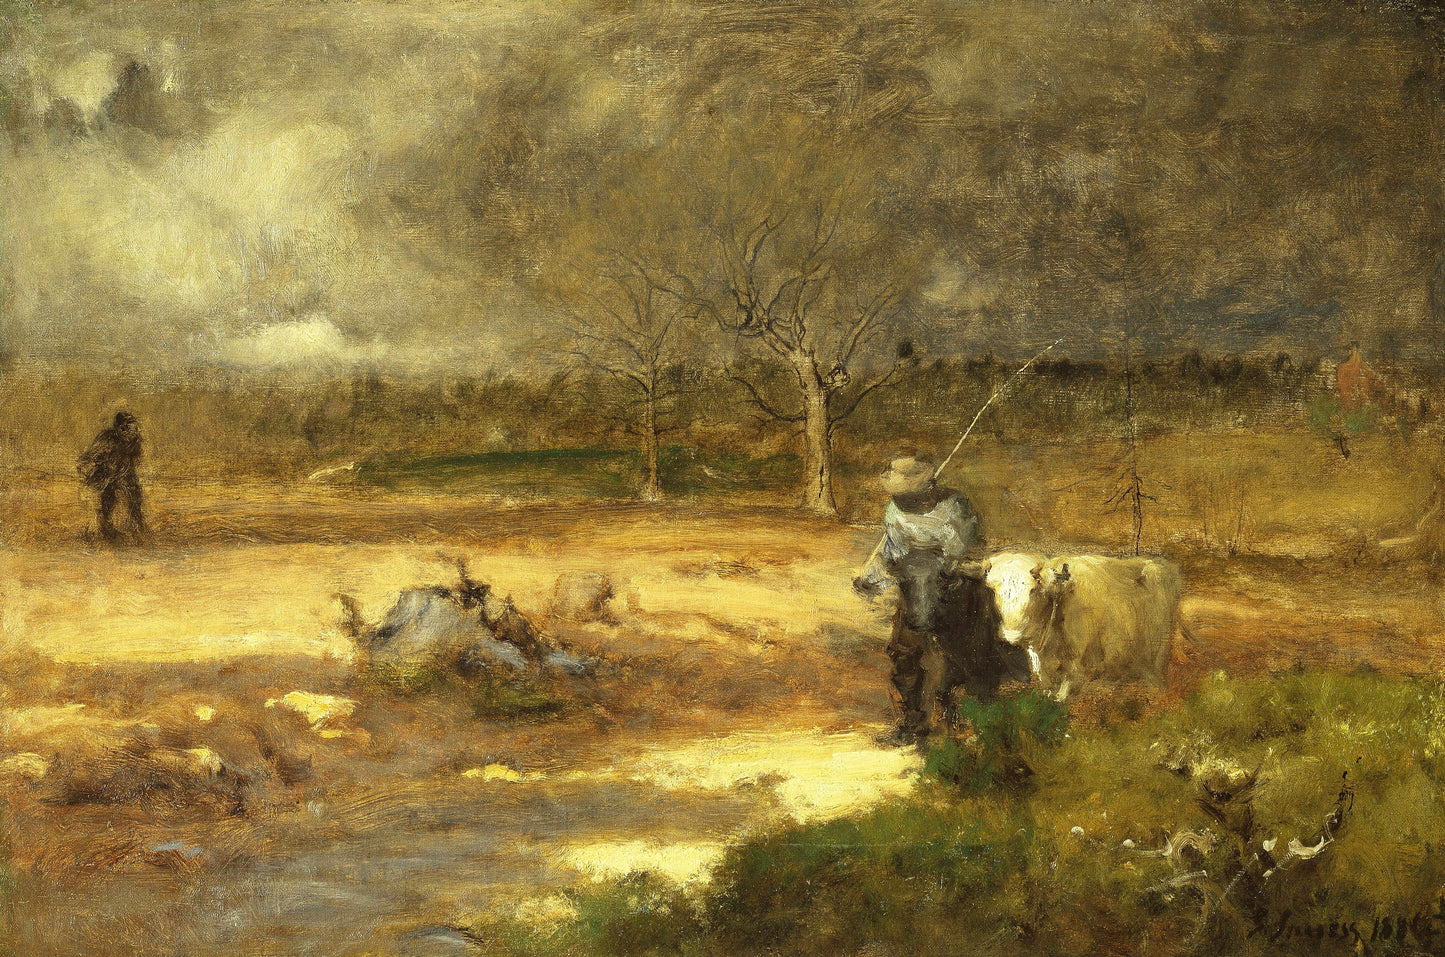 George Inness Landscape Paintings Set 2 [32 Images]